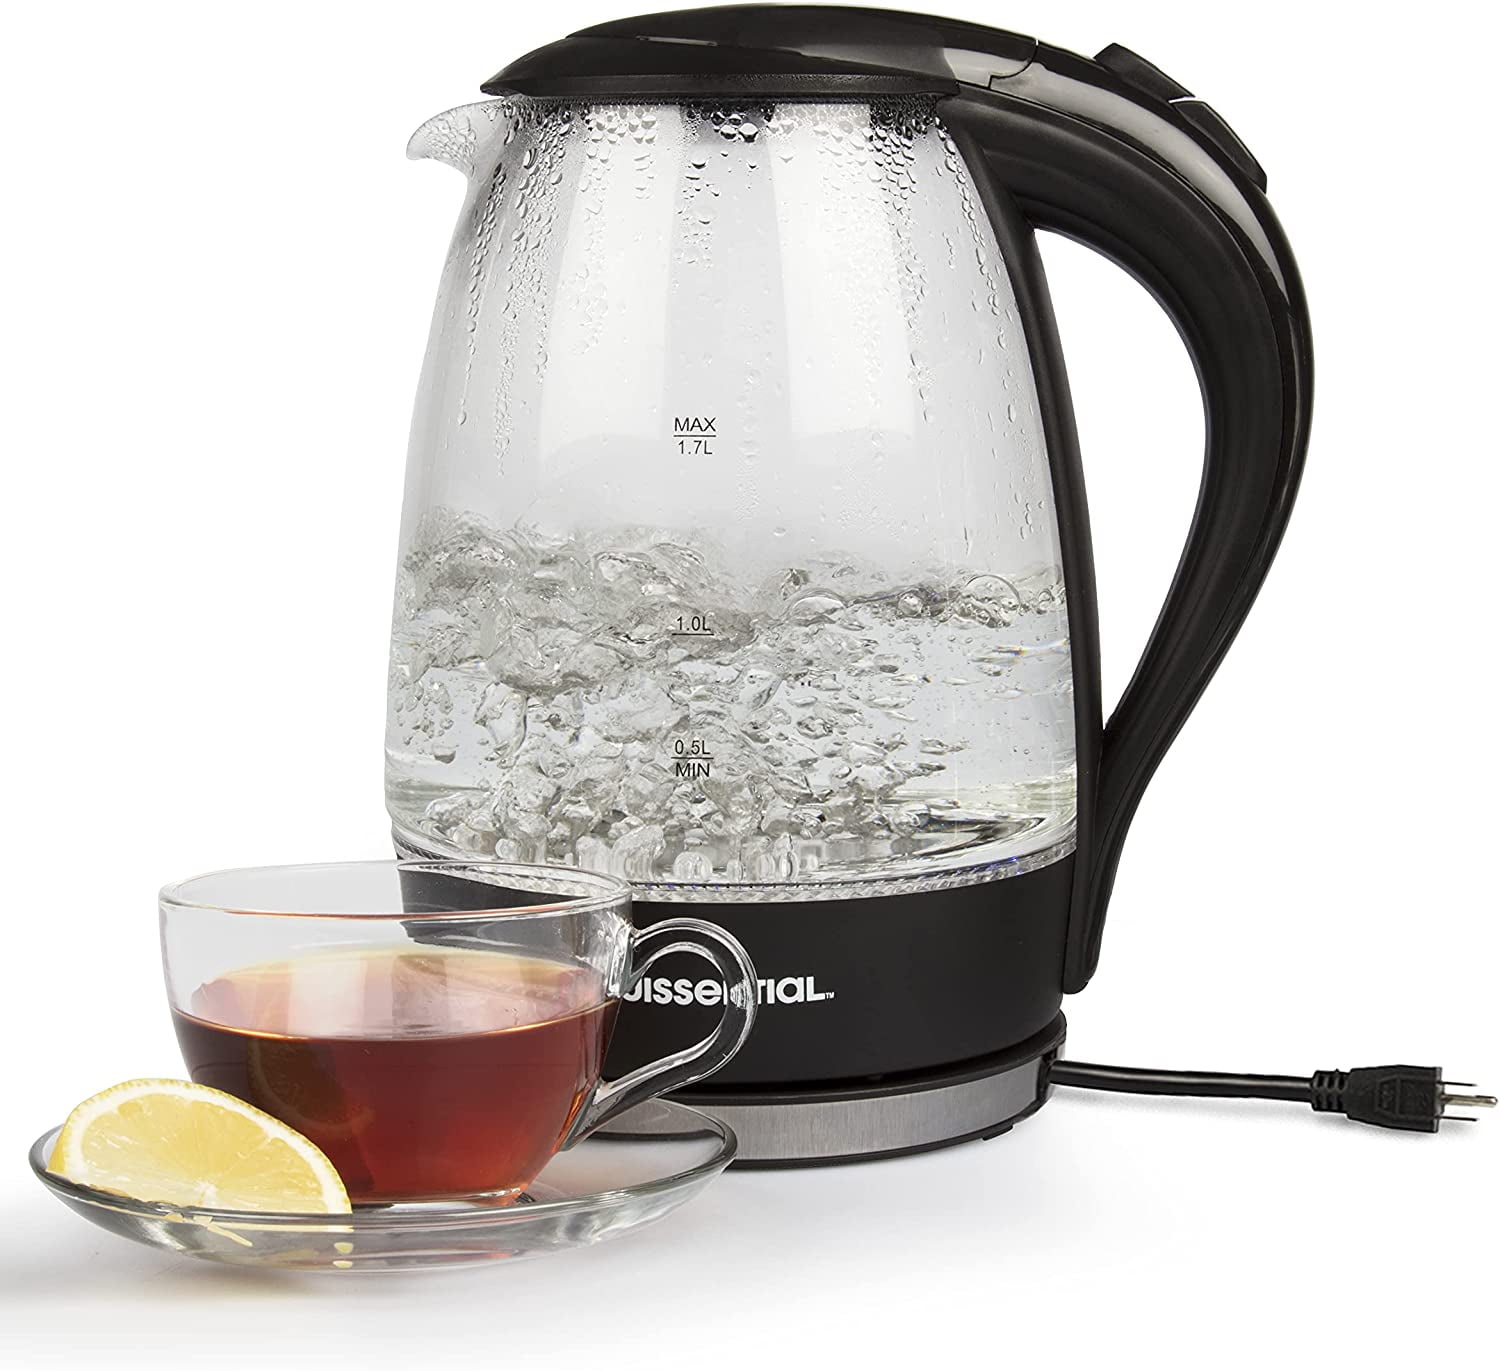 Aiwa 2 in 1 Black Infusion Kettle, Boil and Brew with Removable Stainless  Steel Tea Infuser, 7 Cup or 1.7 Liter Capacity, LED Indicator Light